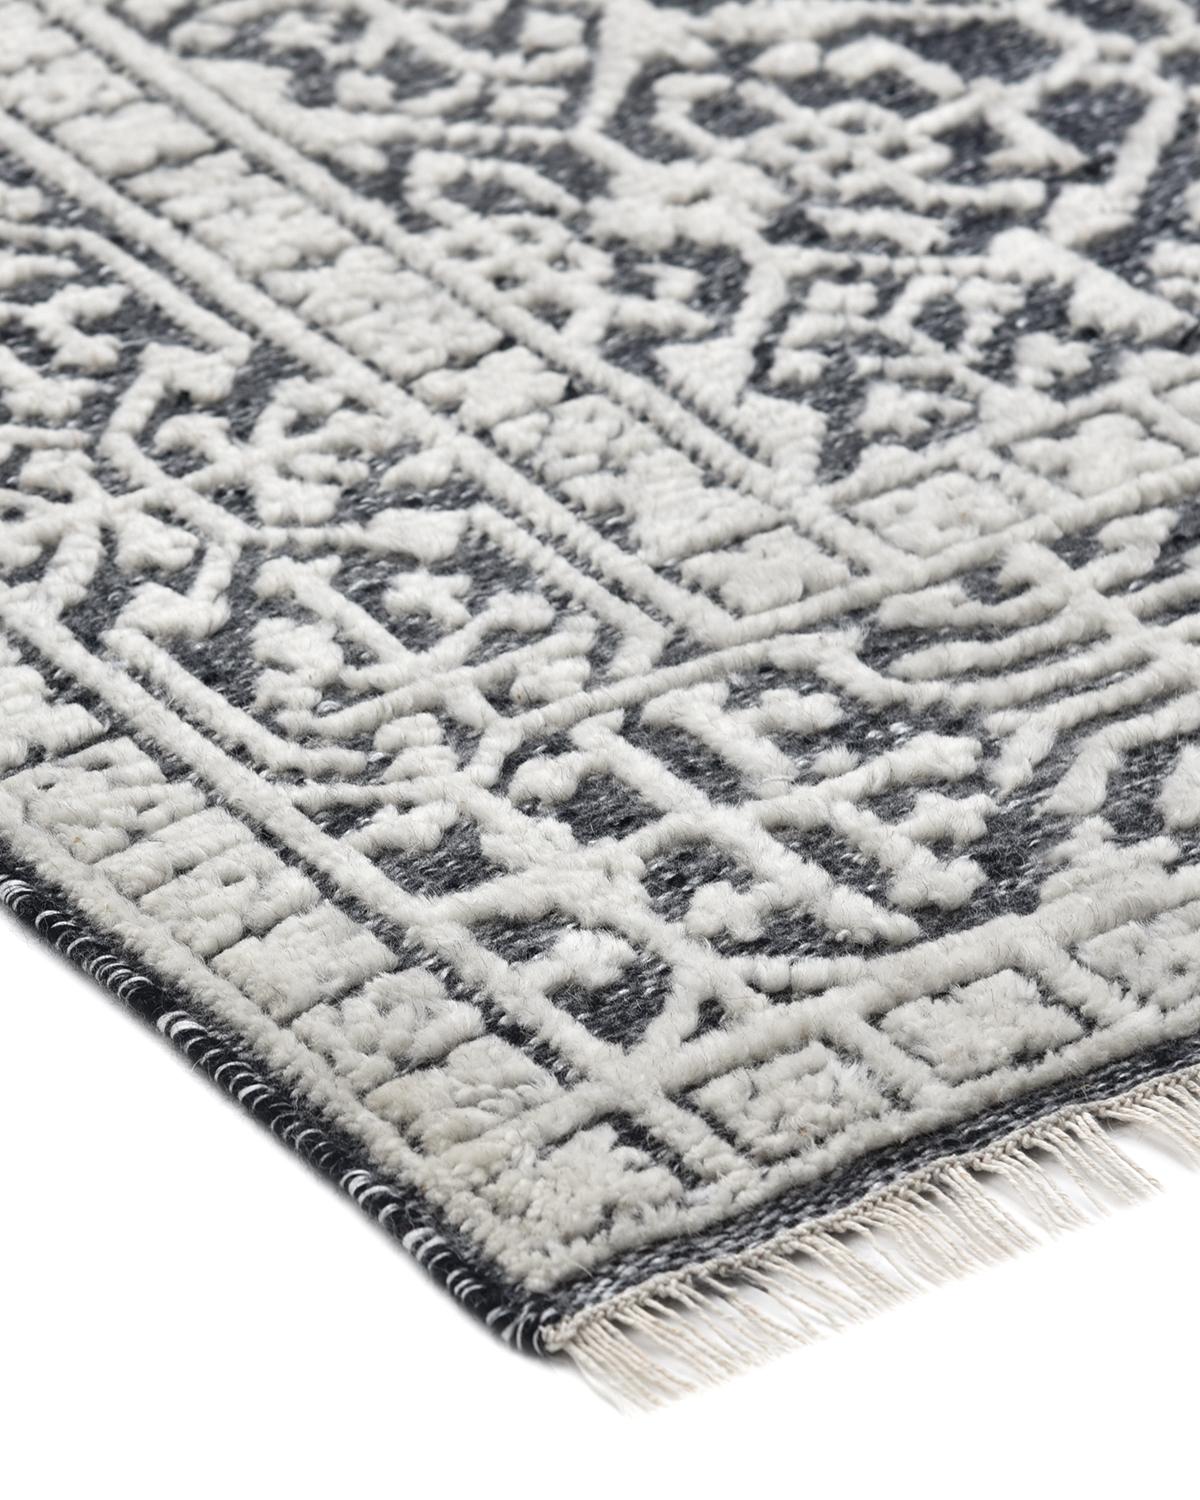 Bridging the gap between traditional and modern, the Transitional collection features rugs that exemplify versatility. Hand-knotted in India, using methods passed down for generations, these rugs will maintain beauty for years.